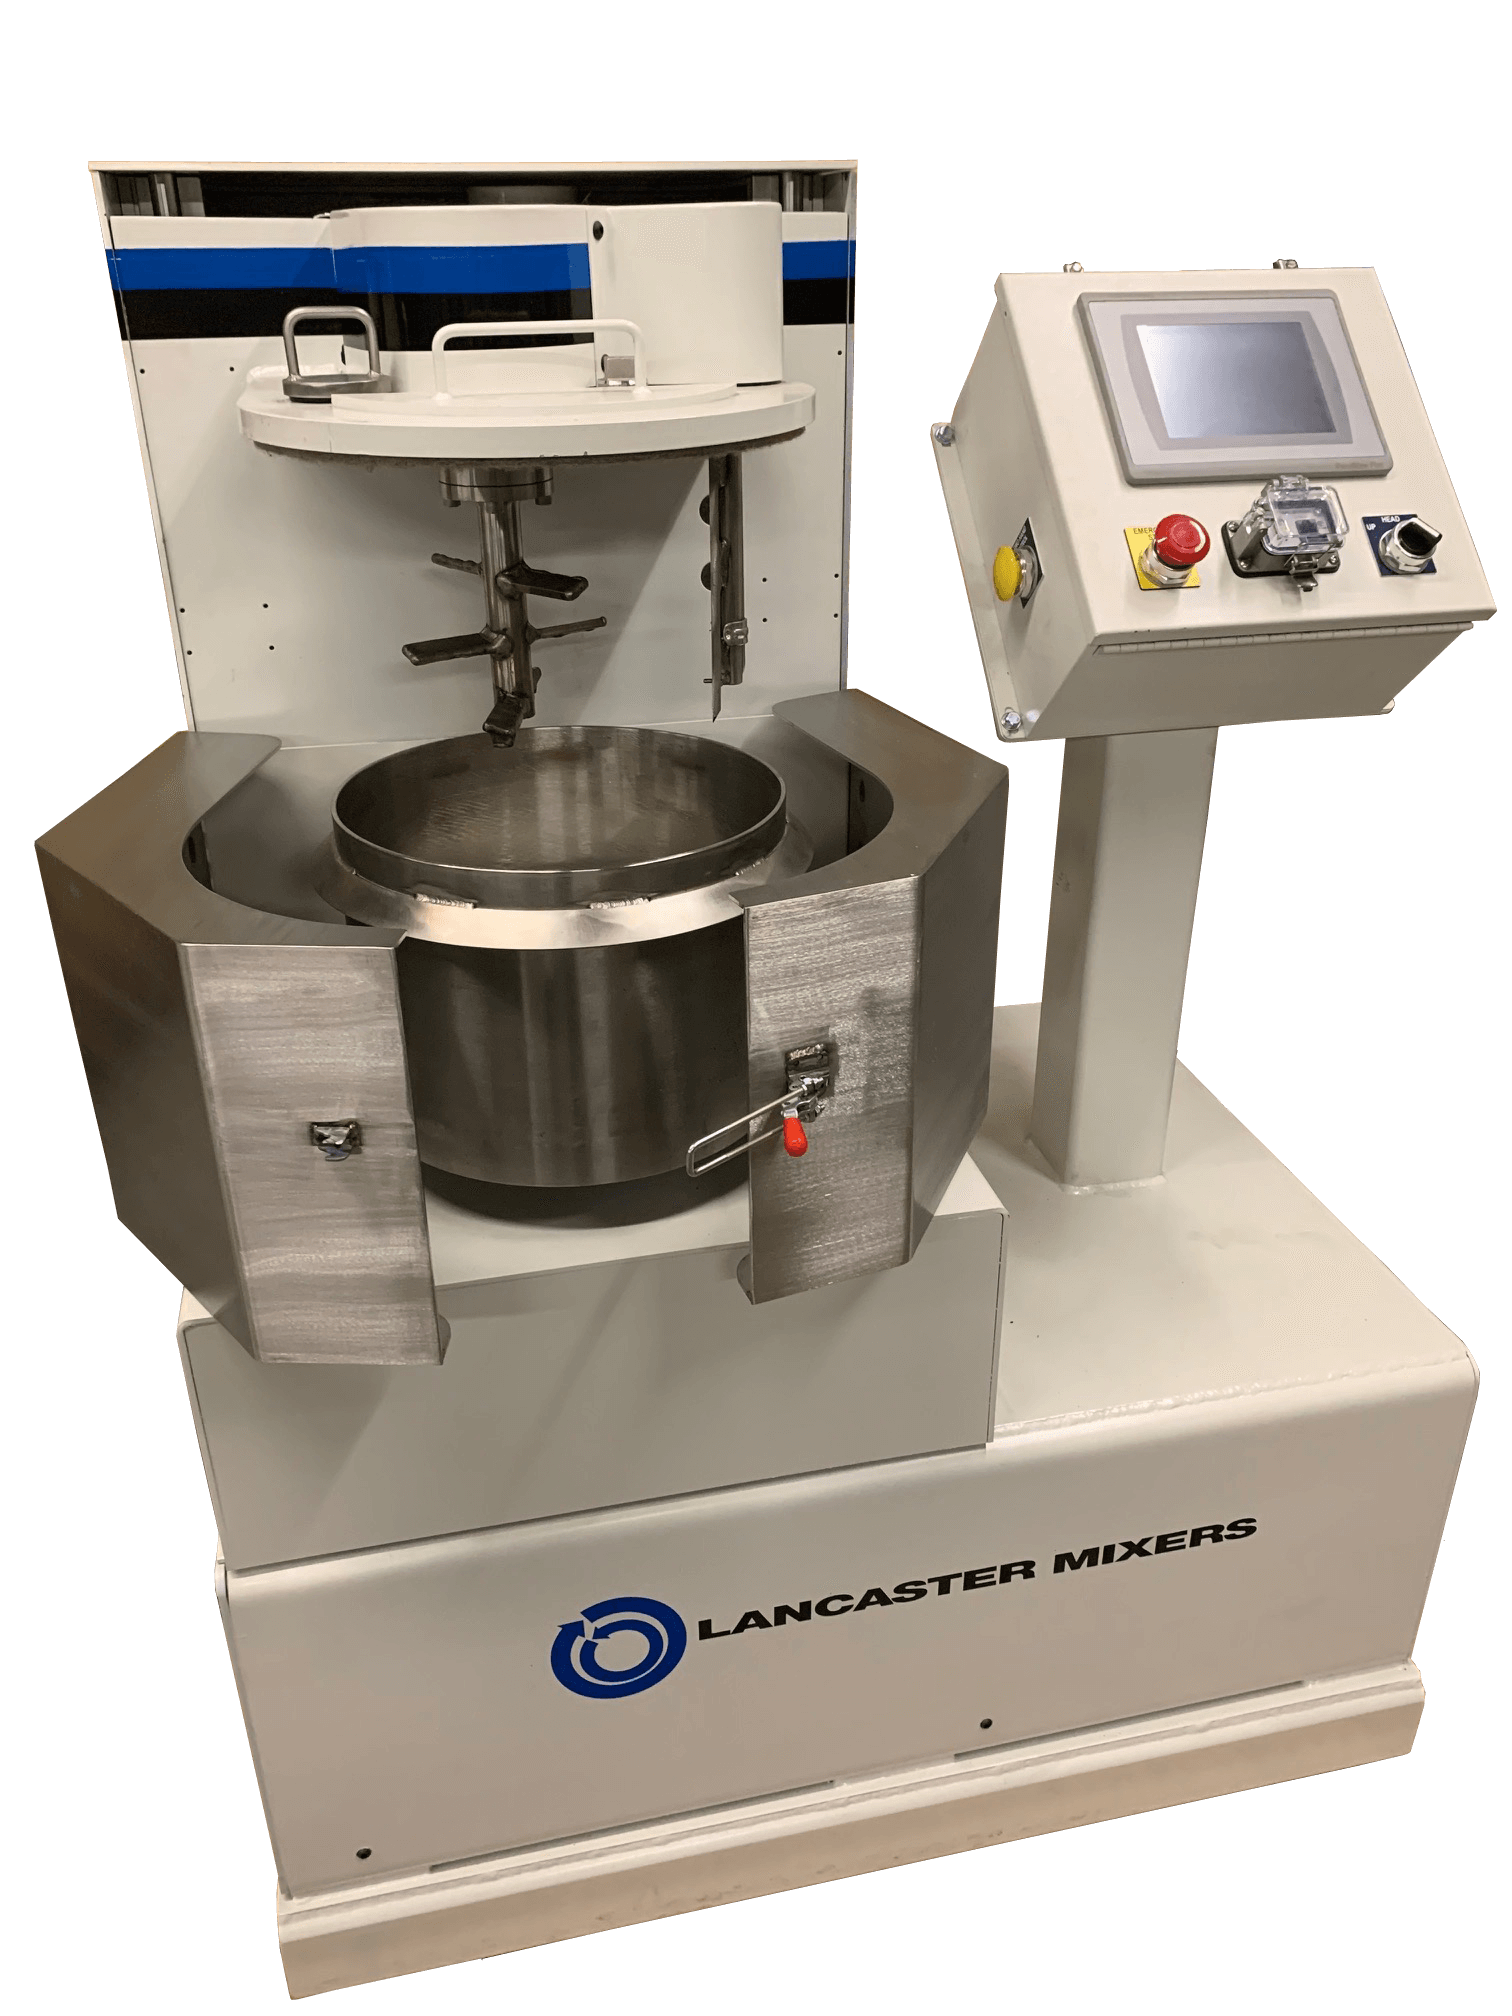 Laboratory_Mixer_Lancaster_Products